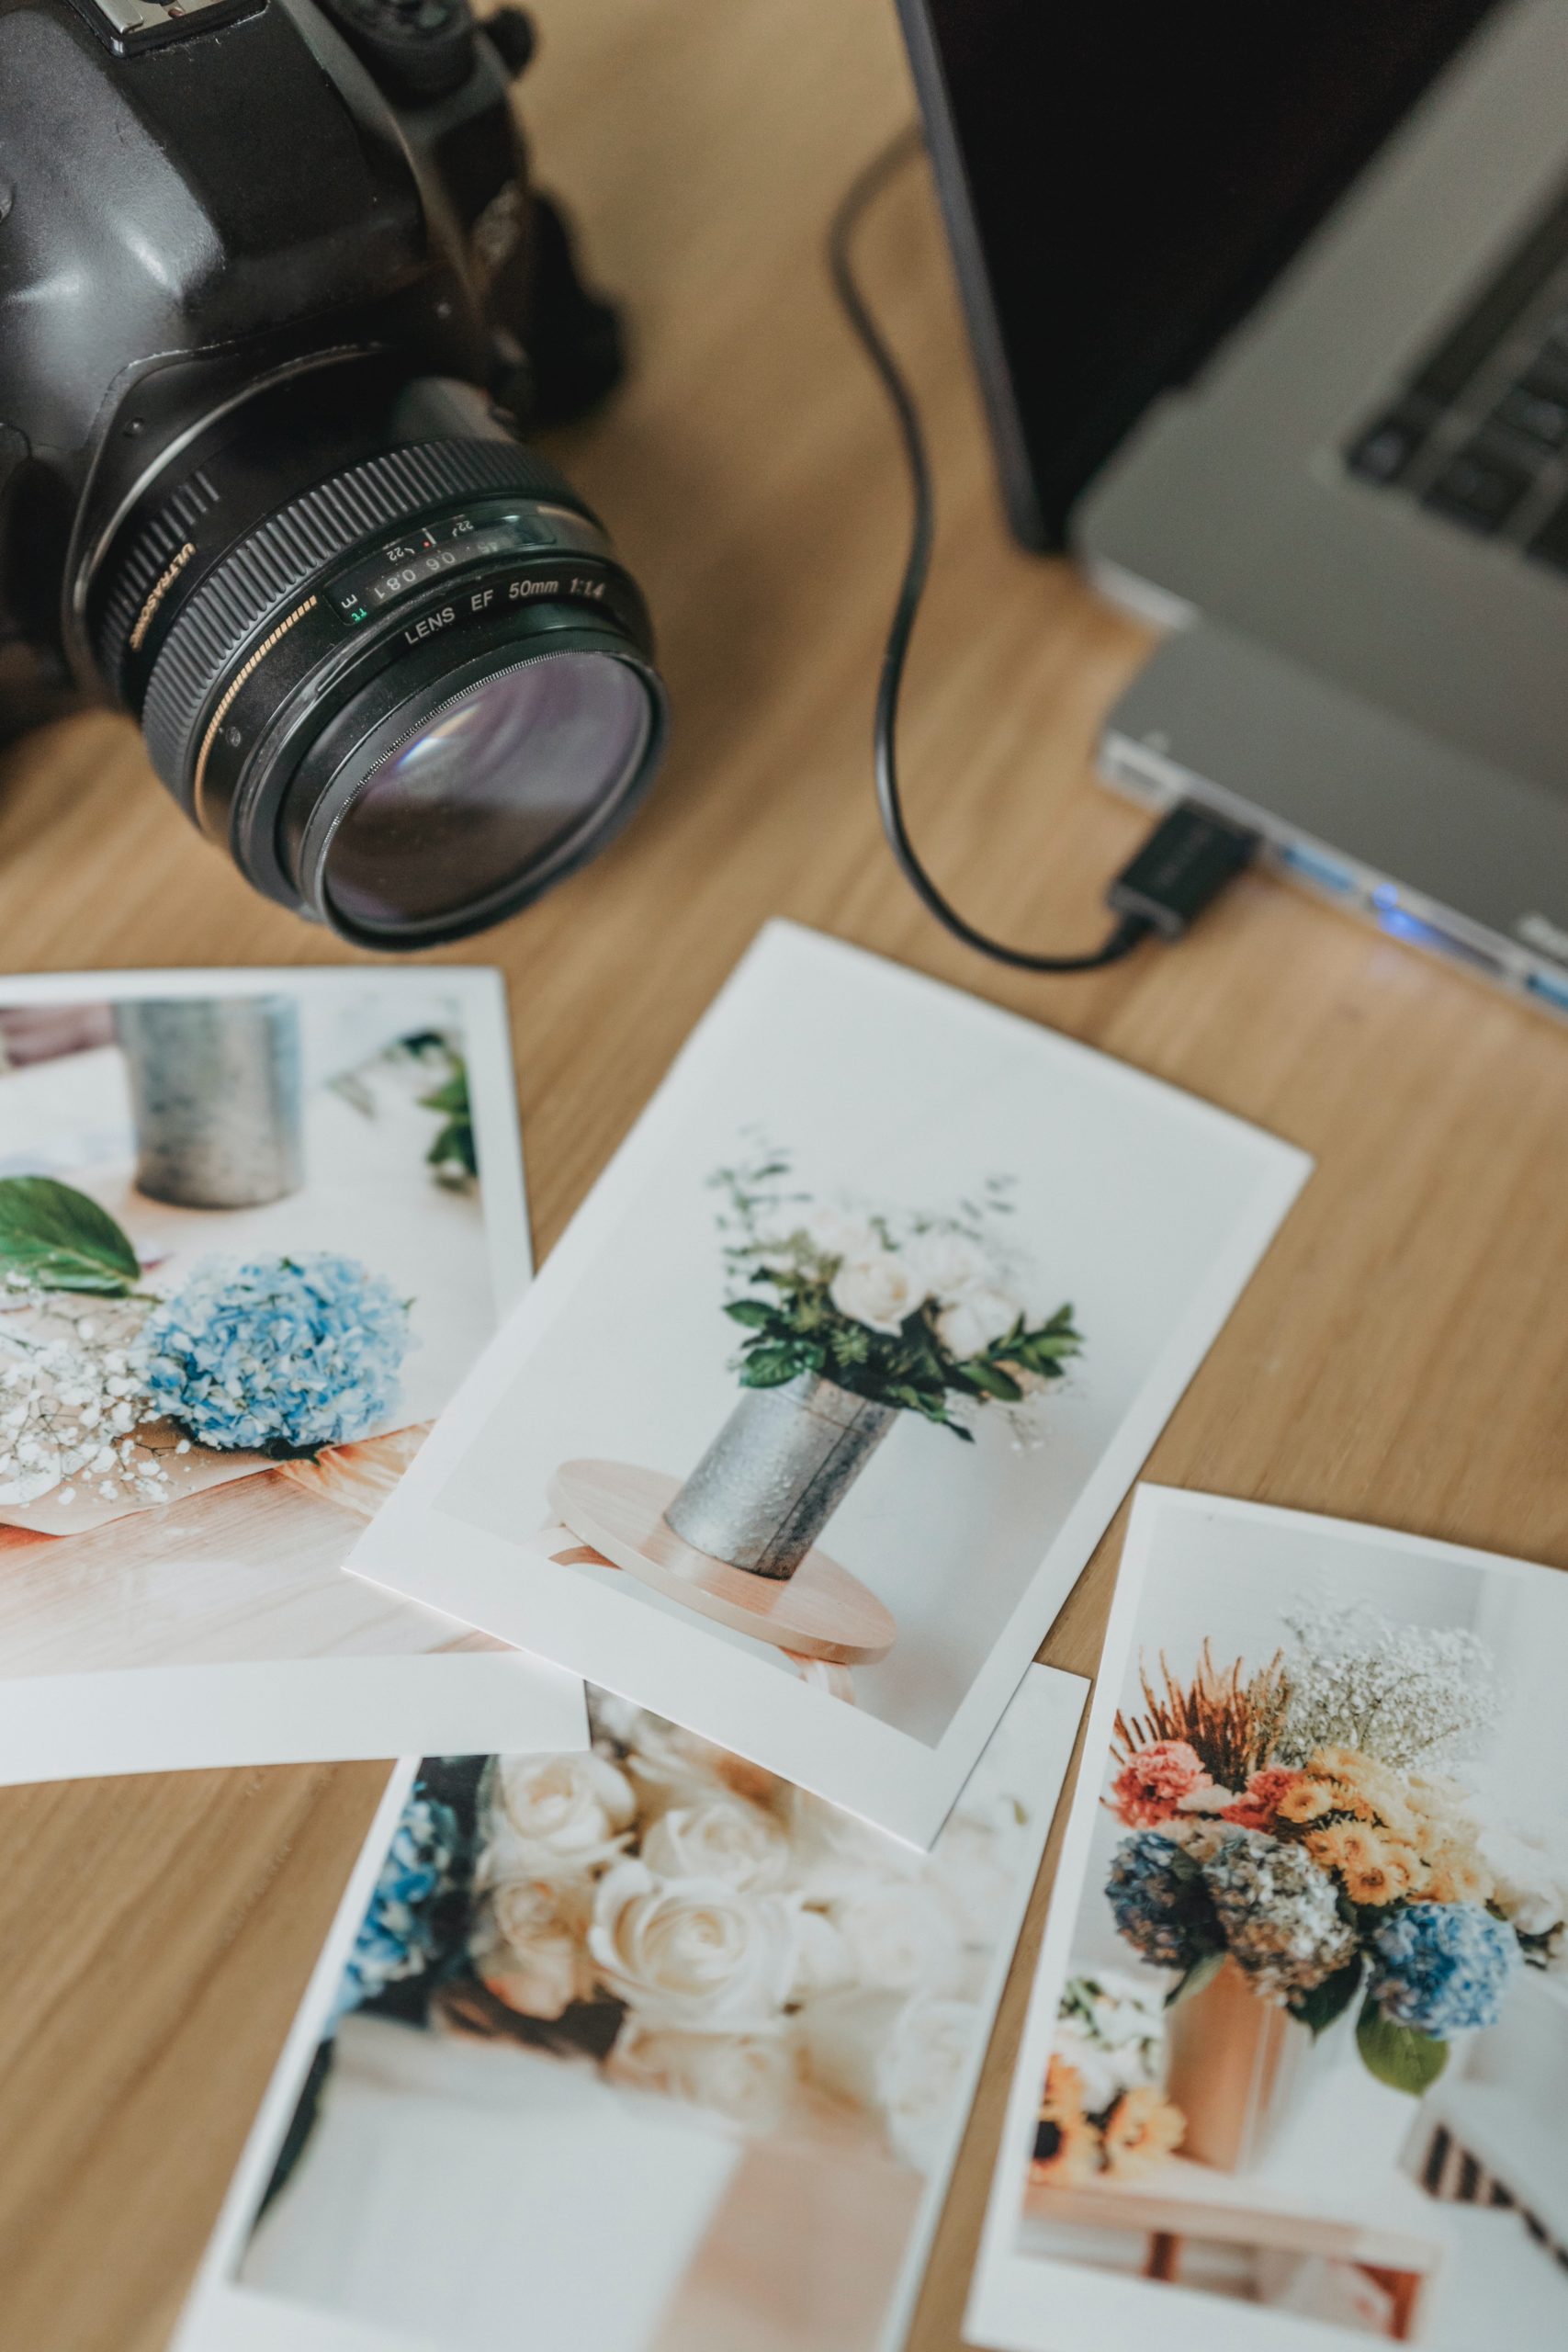 Get Photos Printed for Your Home With These Resources